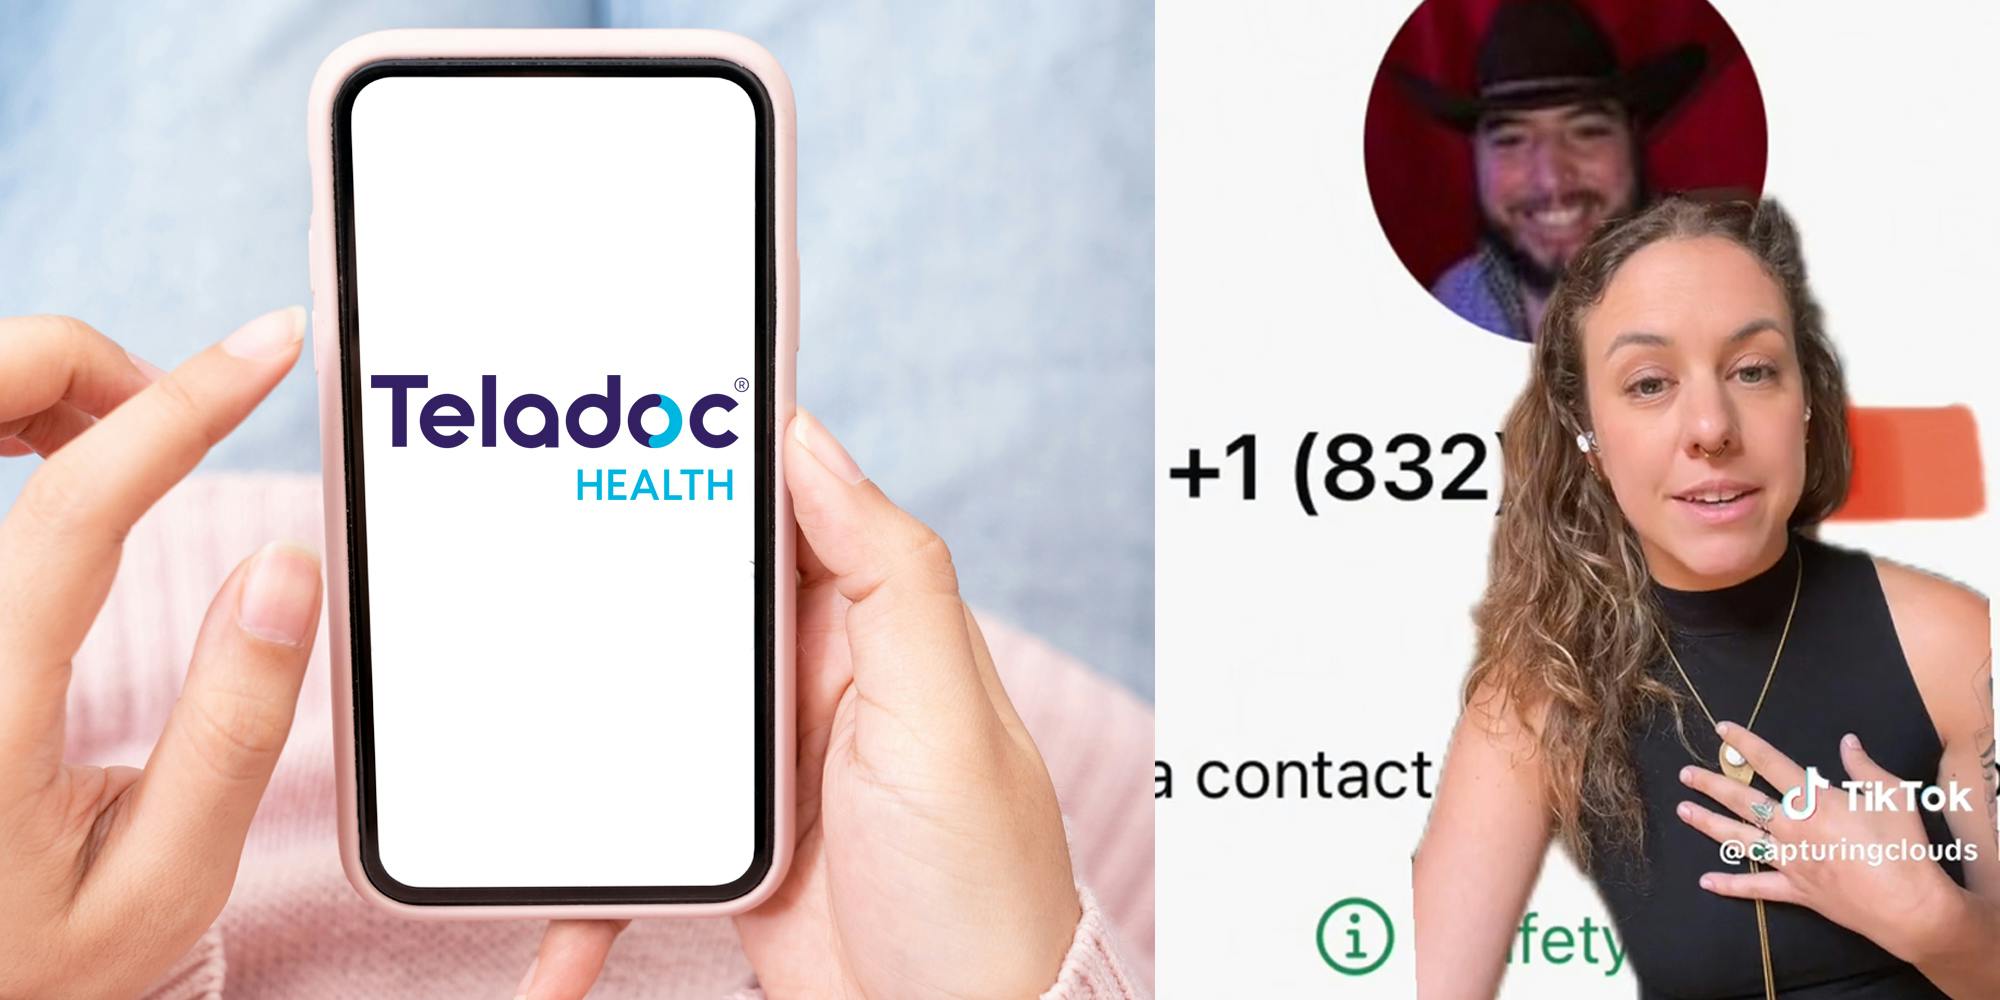 ‘We can’t even have telehealth appointments’: Woman says Teladoc Health worker stole her contact info to DM her